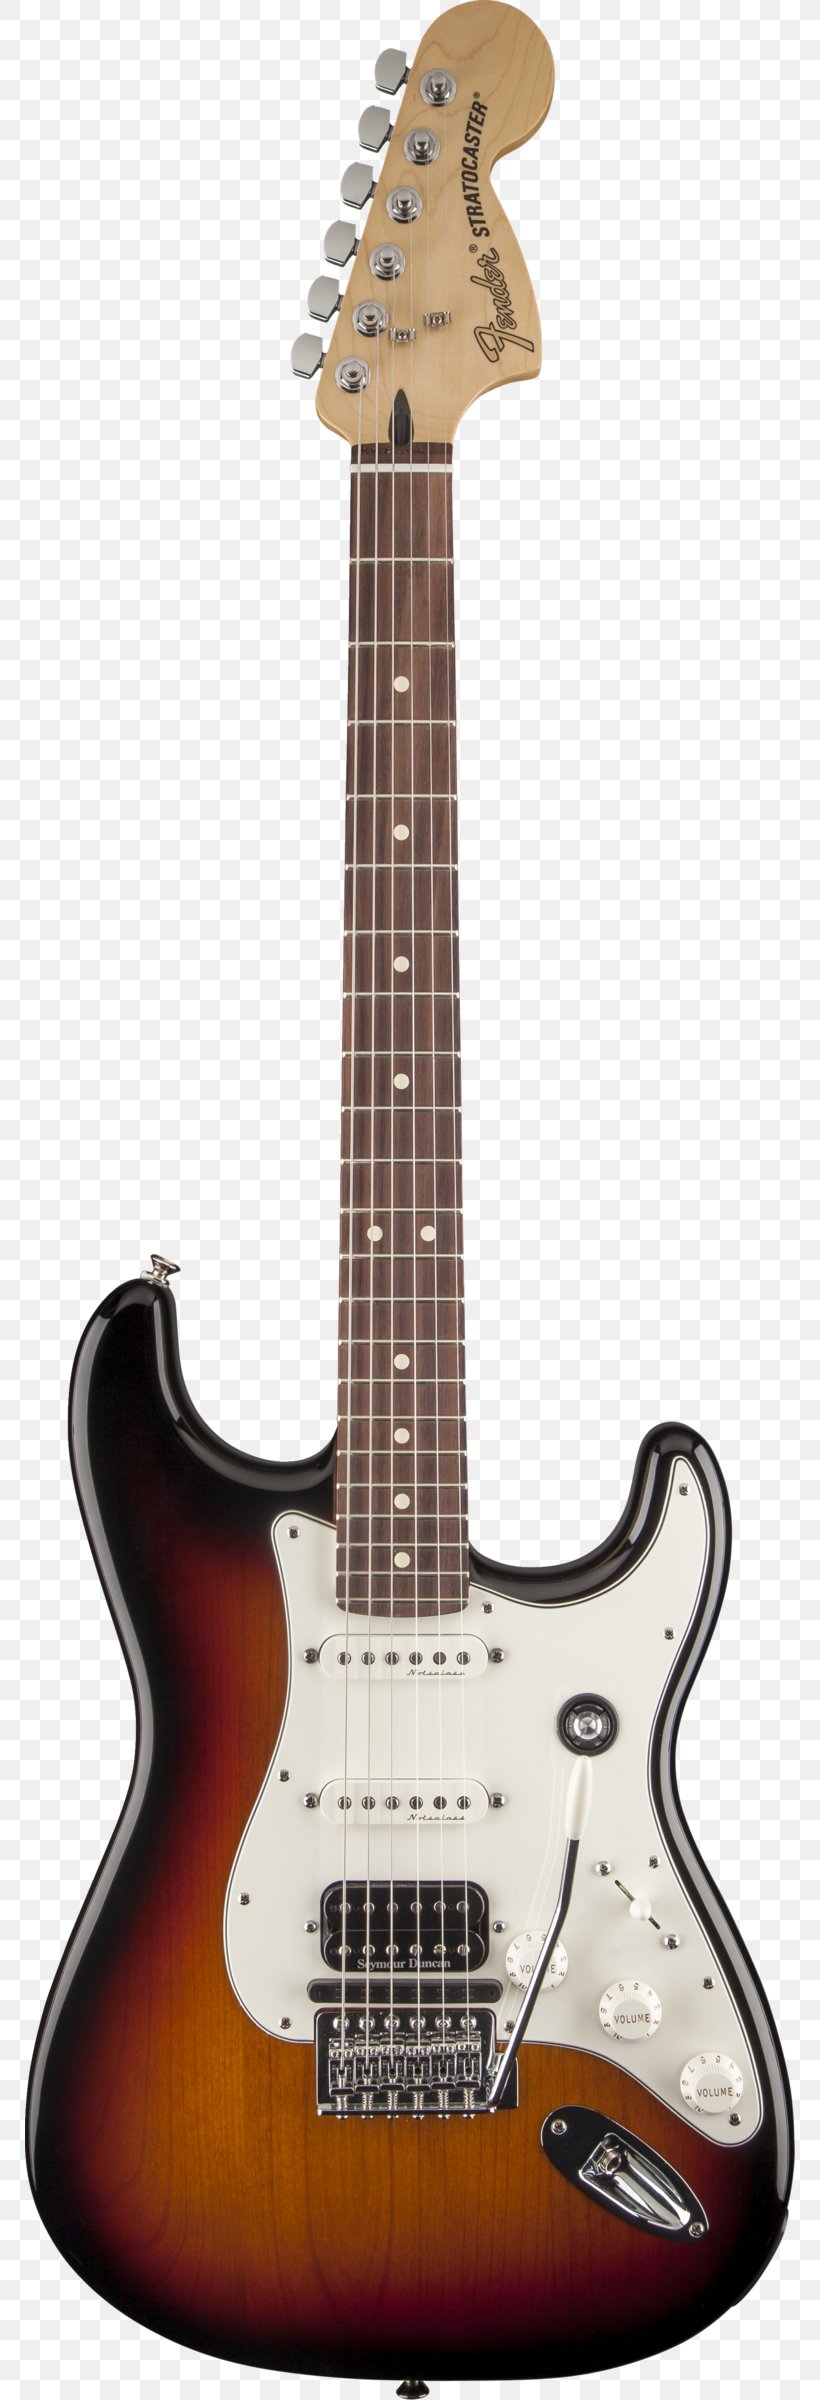 Fender Stratocaster Fender Musical Instruments Corporation Squier Electric Guitar Fender American Deluxe Series, PNG, 770x2400px, Fender Stratocaster, Acoustic Electric Guitar, Acoustic Guitar, Bass Guitar, Electric Guitar Download Free